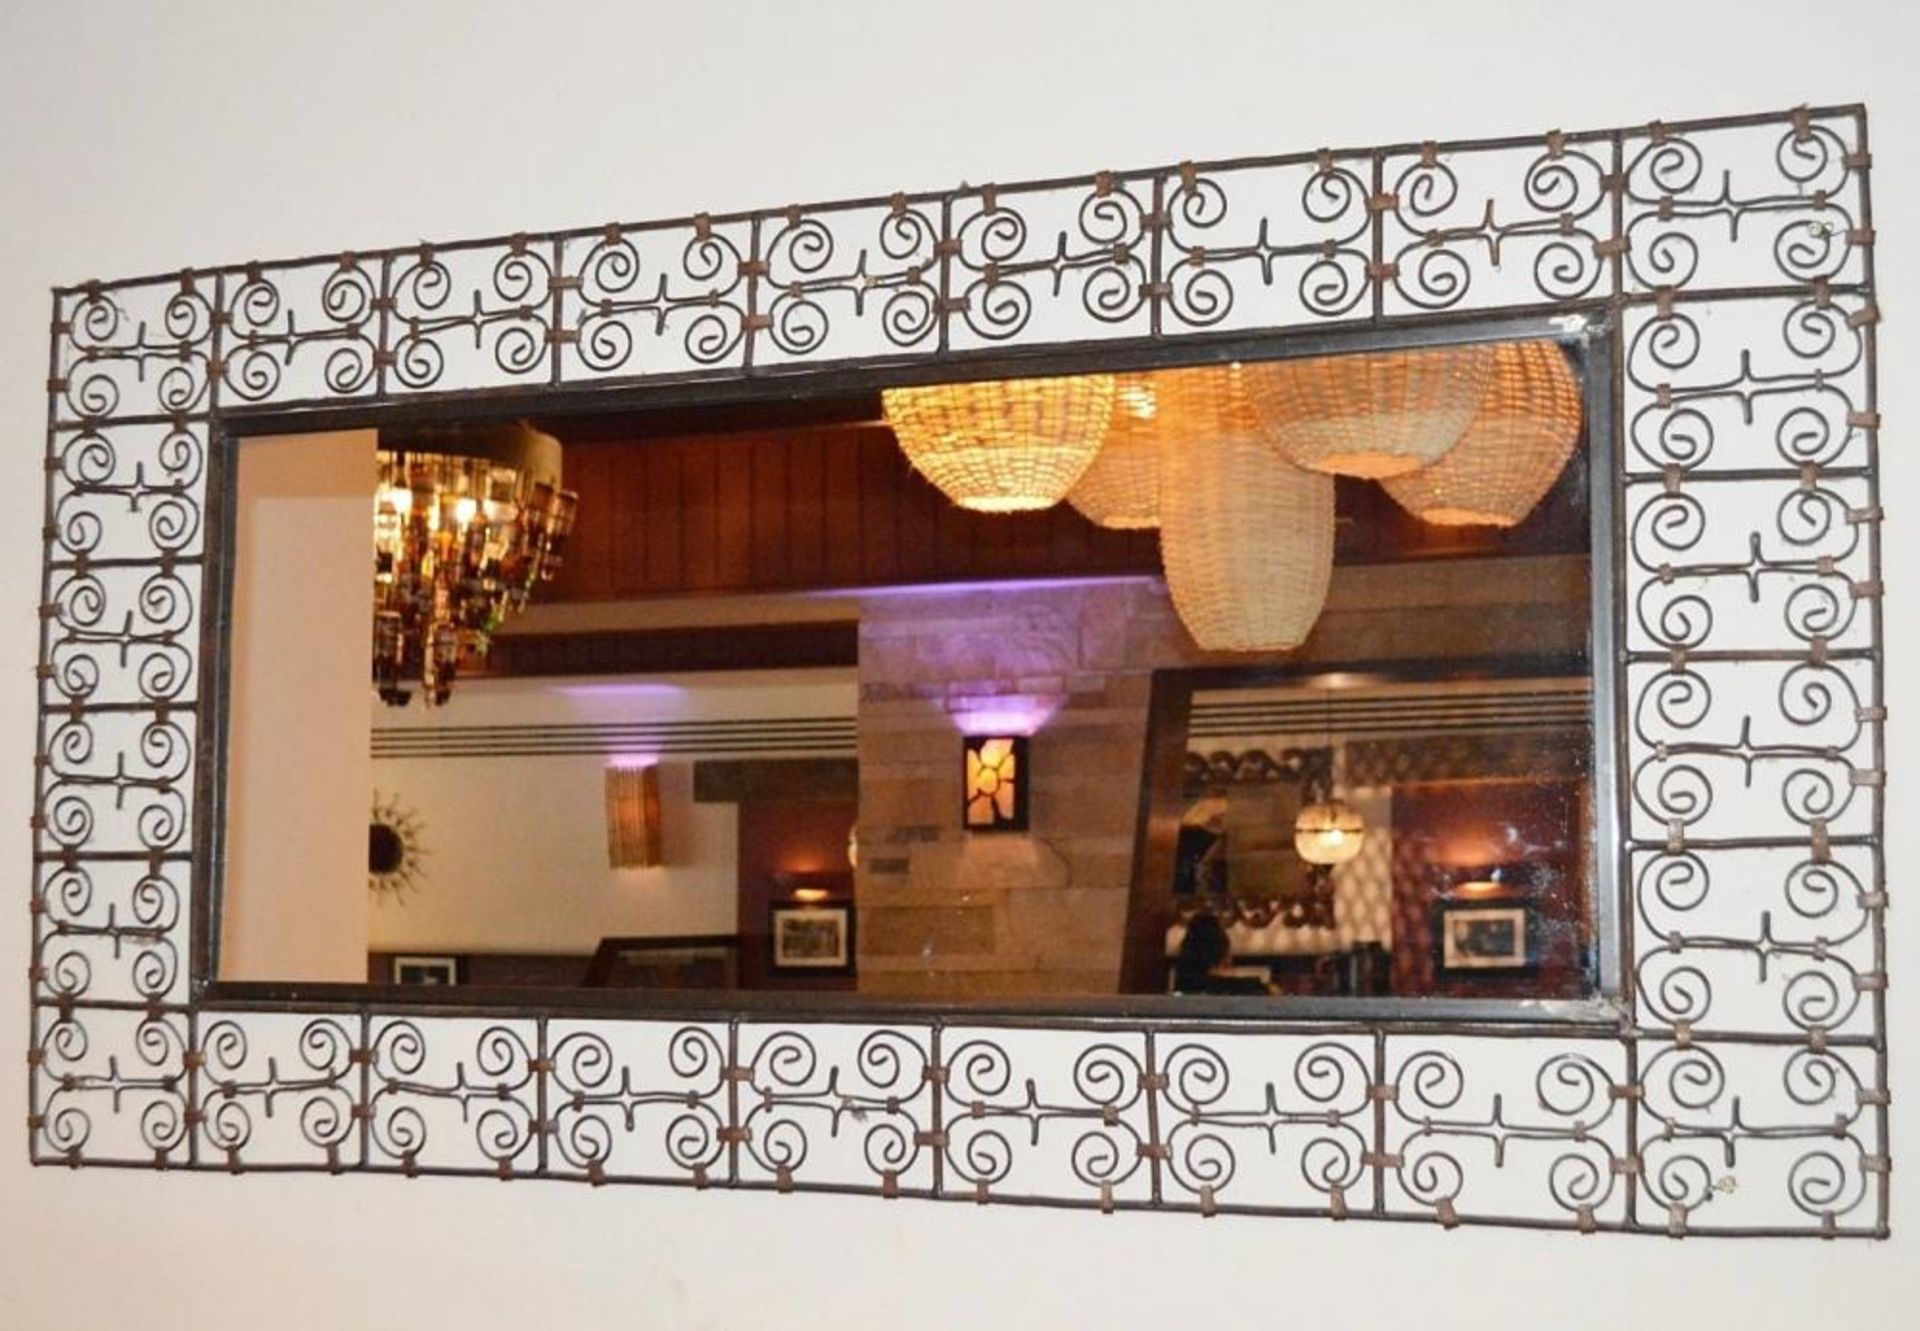 1 x Decorative Rectangular Mirror With A Rustic Handmade Metal Frame - Dimensions: Height 67cm X 130